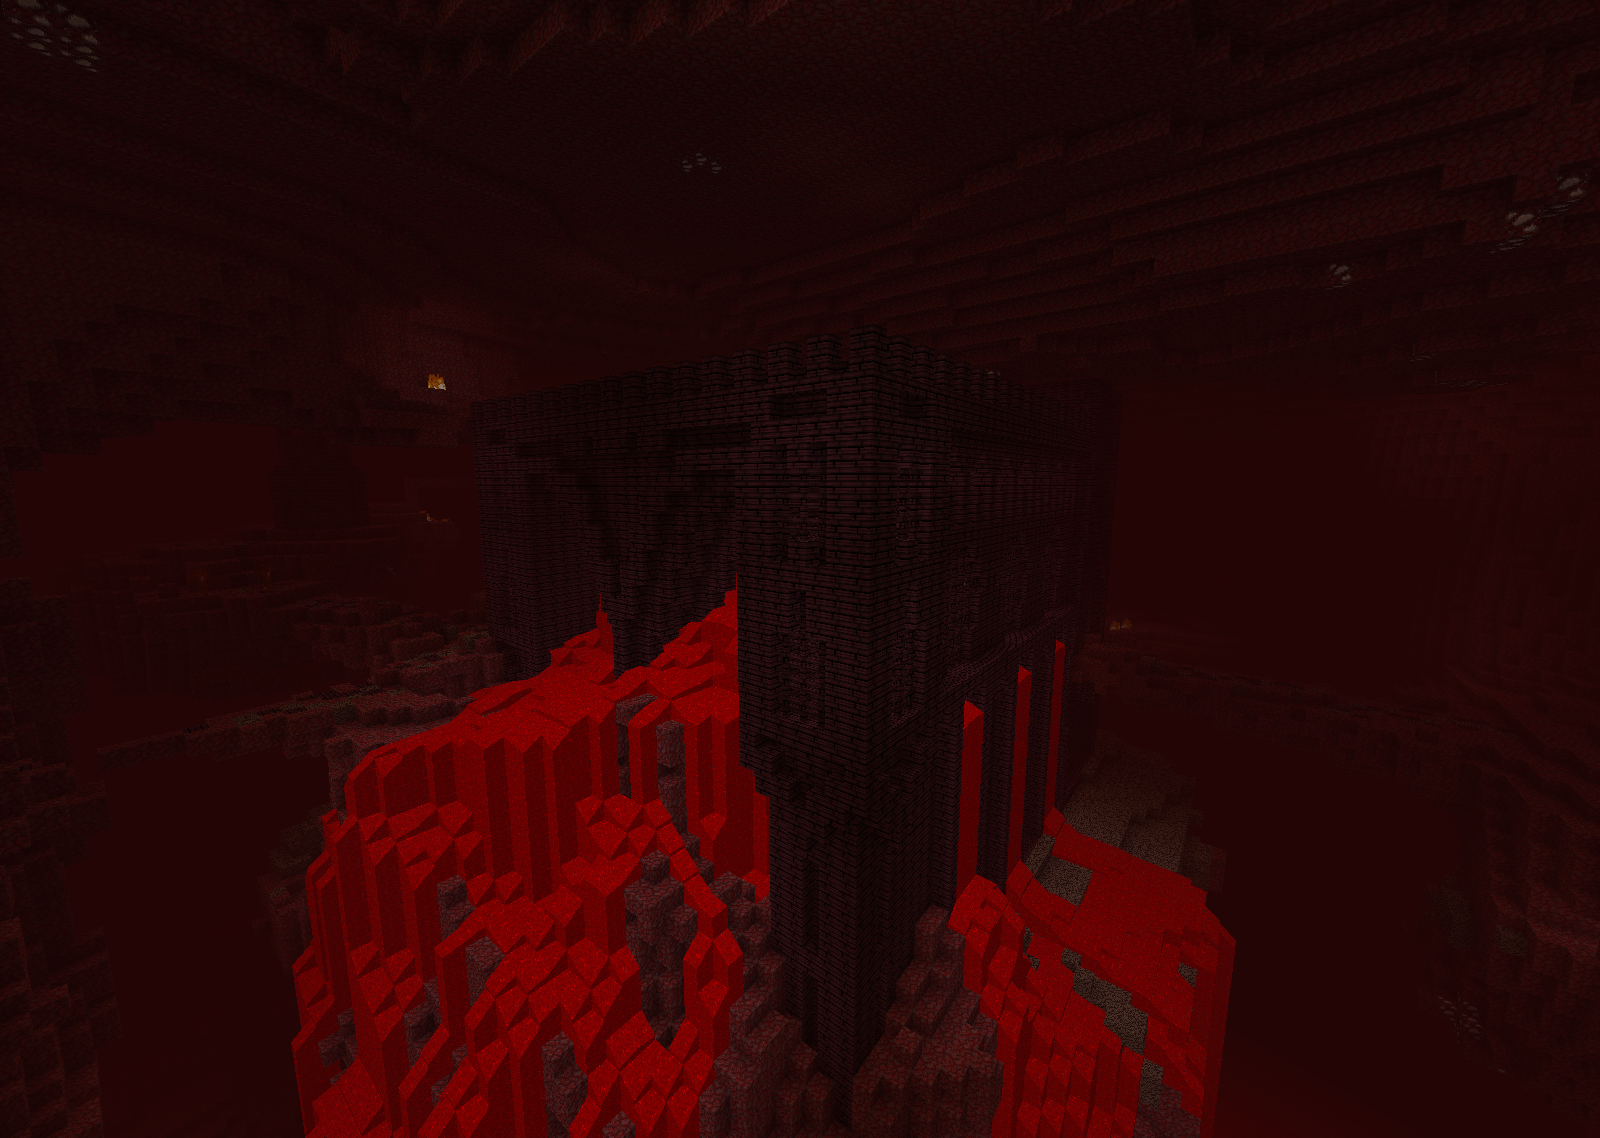 Nether castle